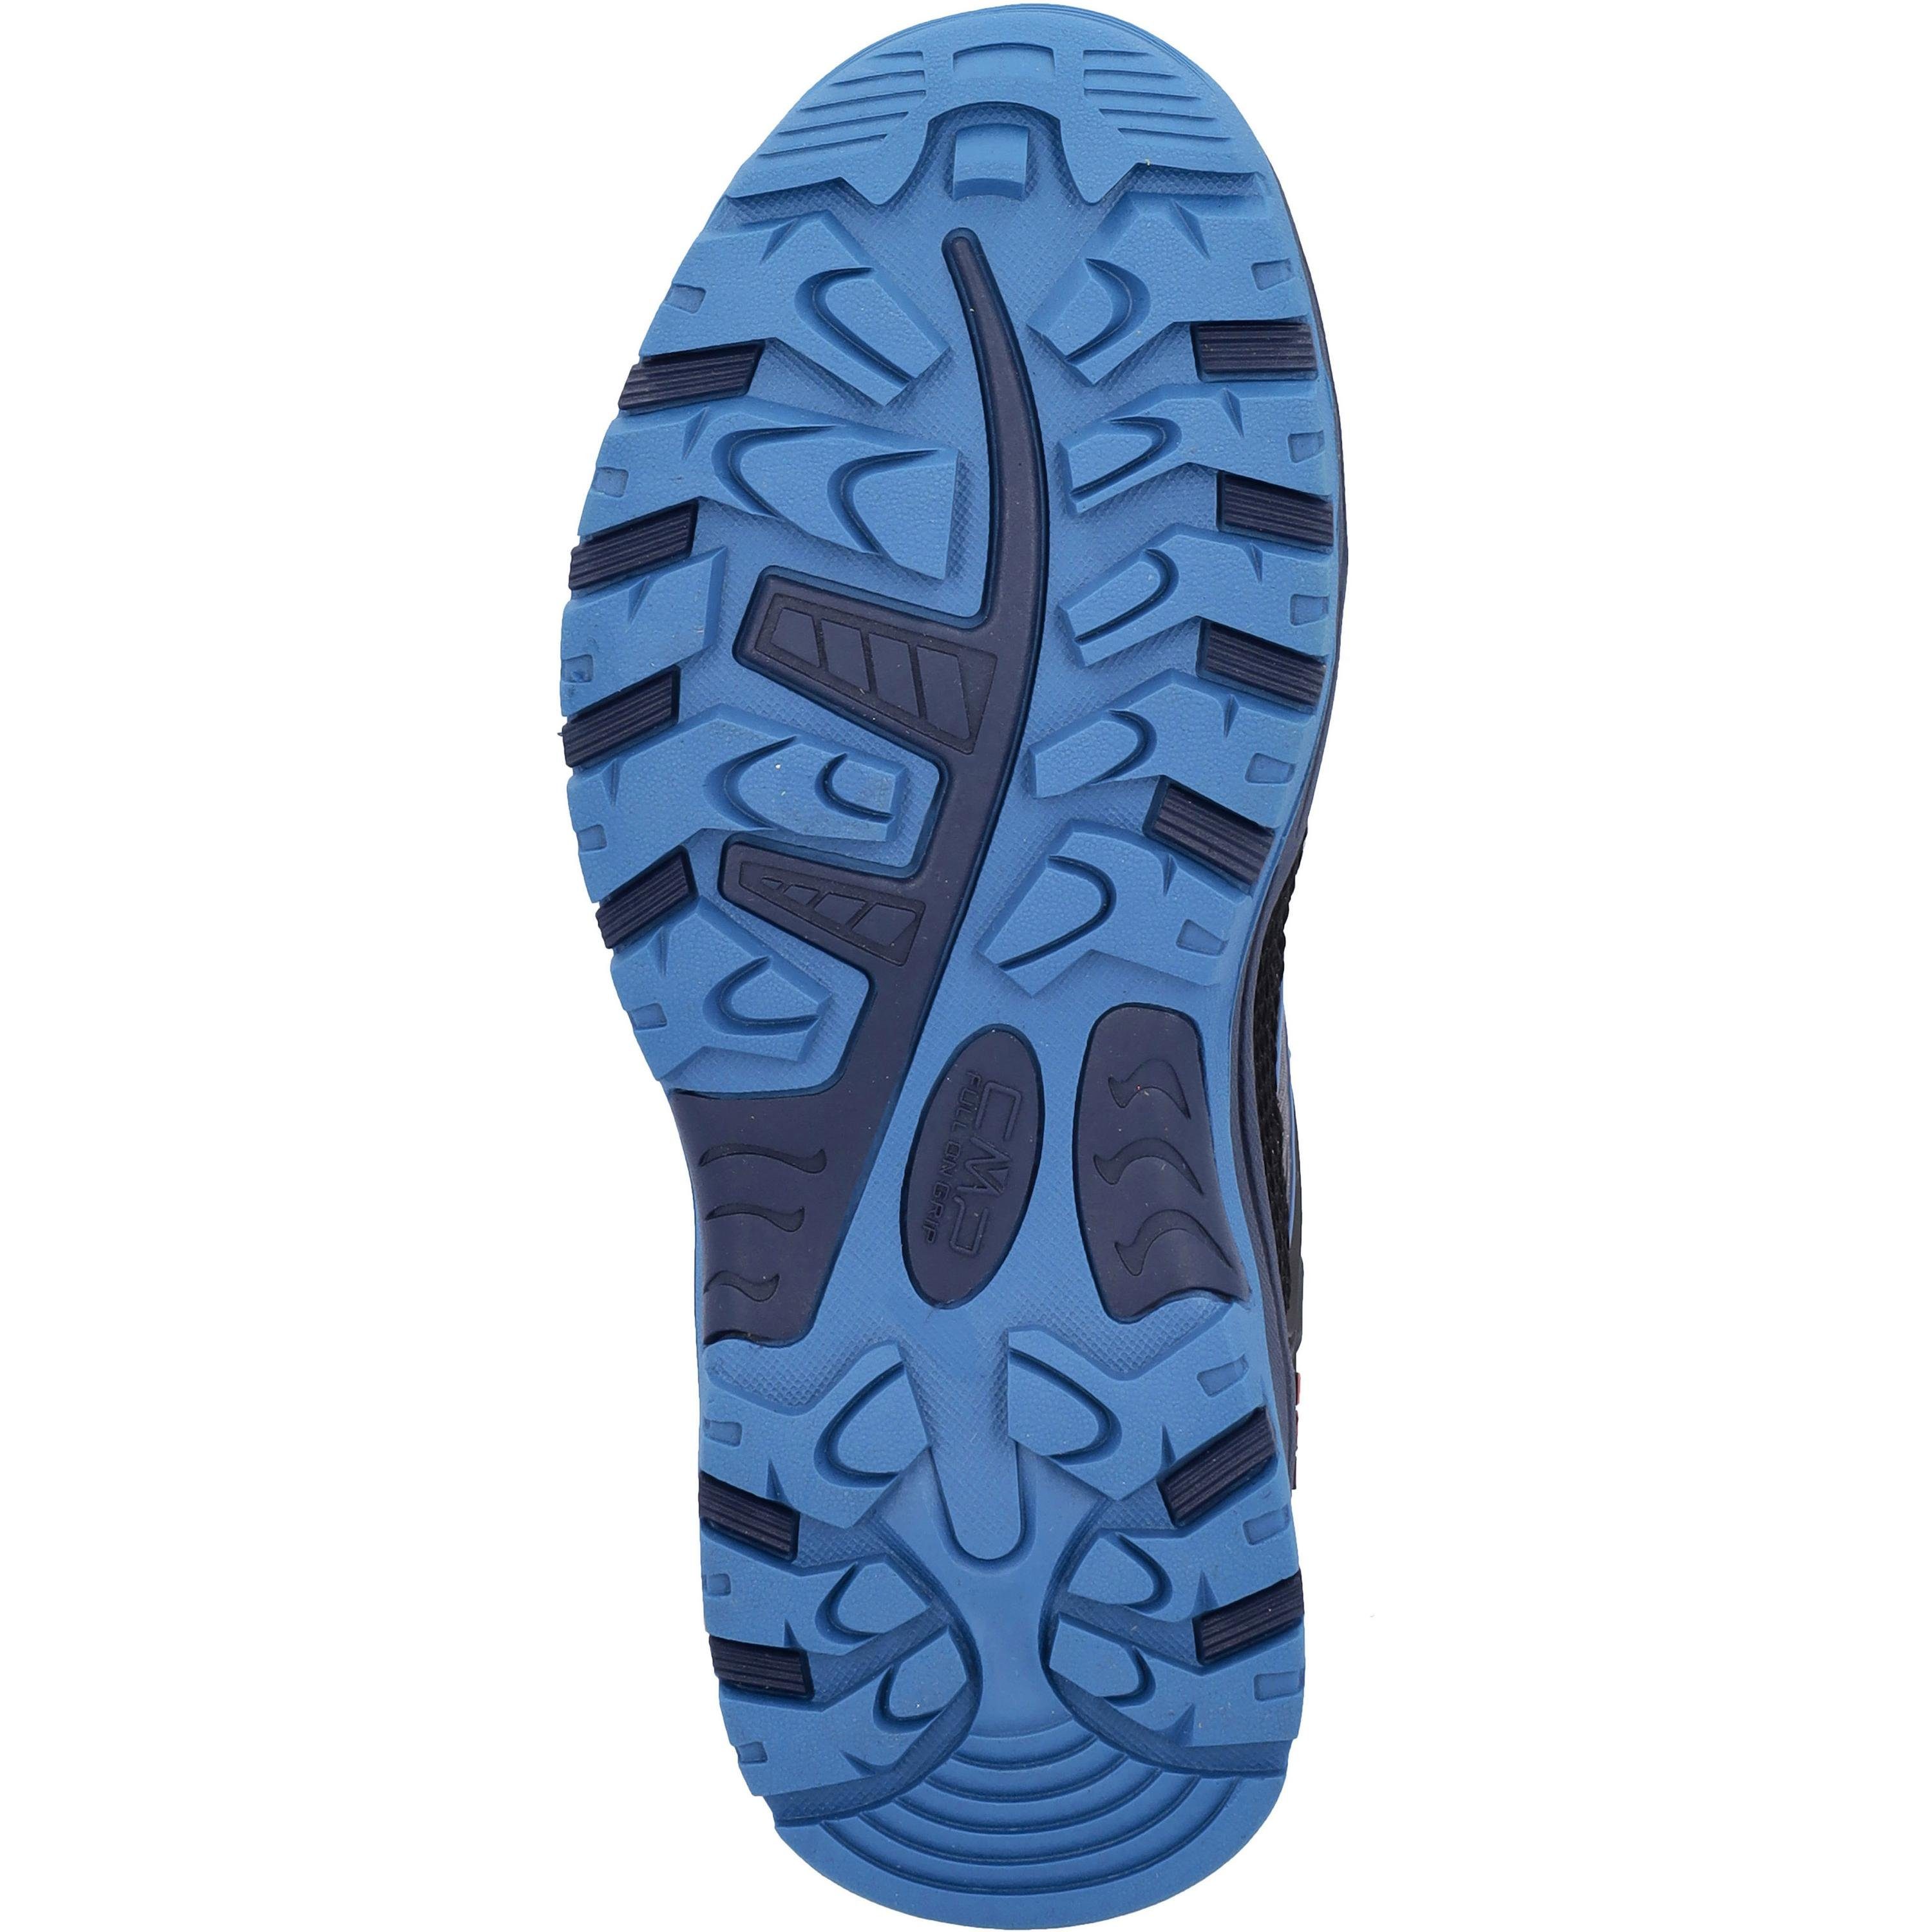 CMP Rigel Low WP graffite-oltremare Outdoorschuh